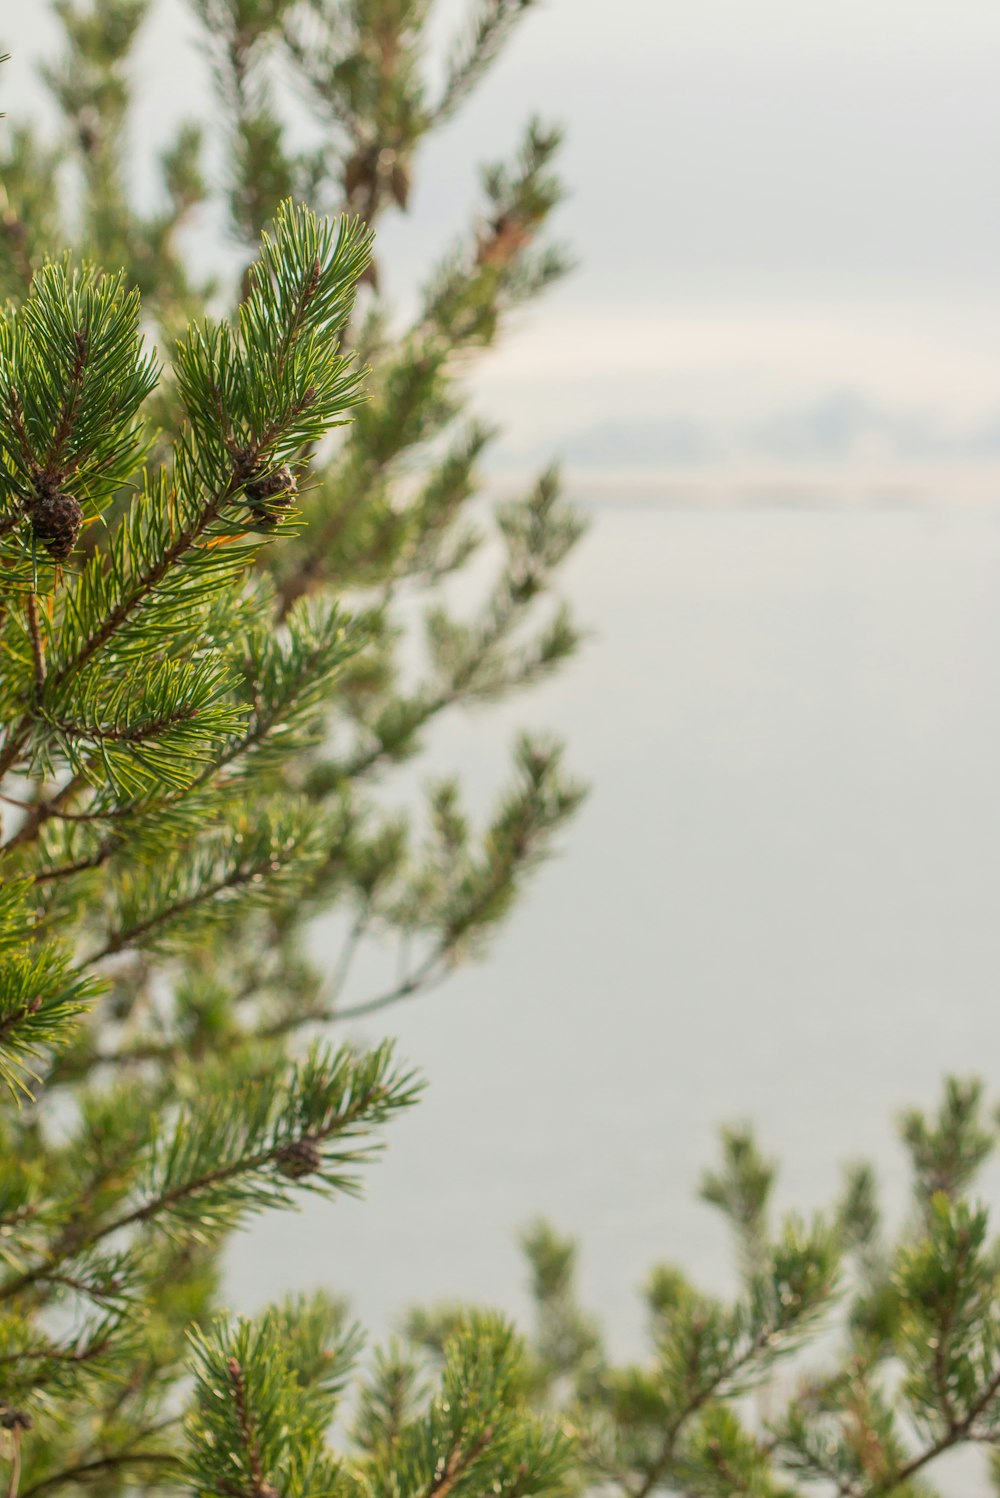 a close up of a pine tree with a body of water in the background